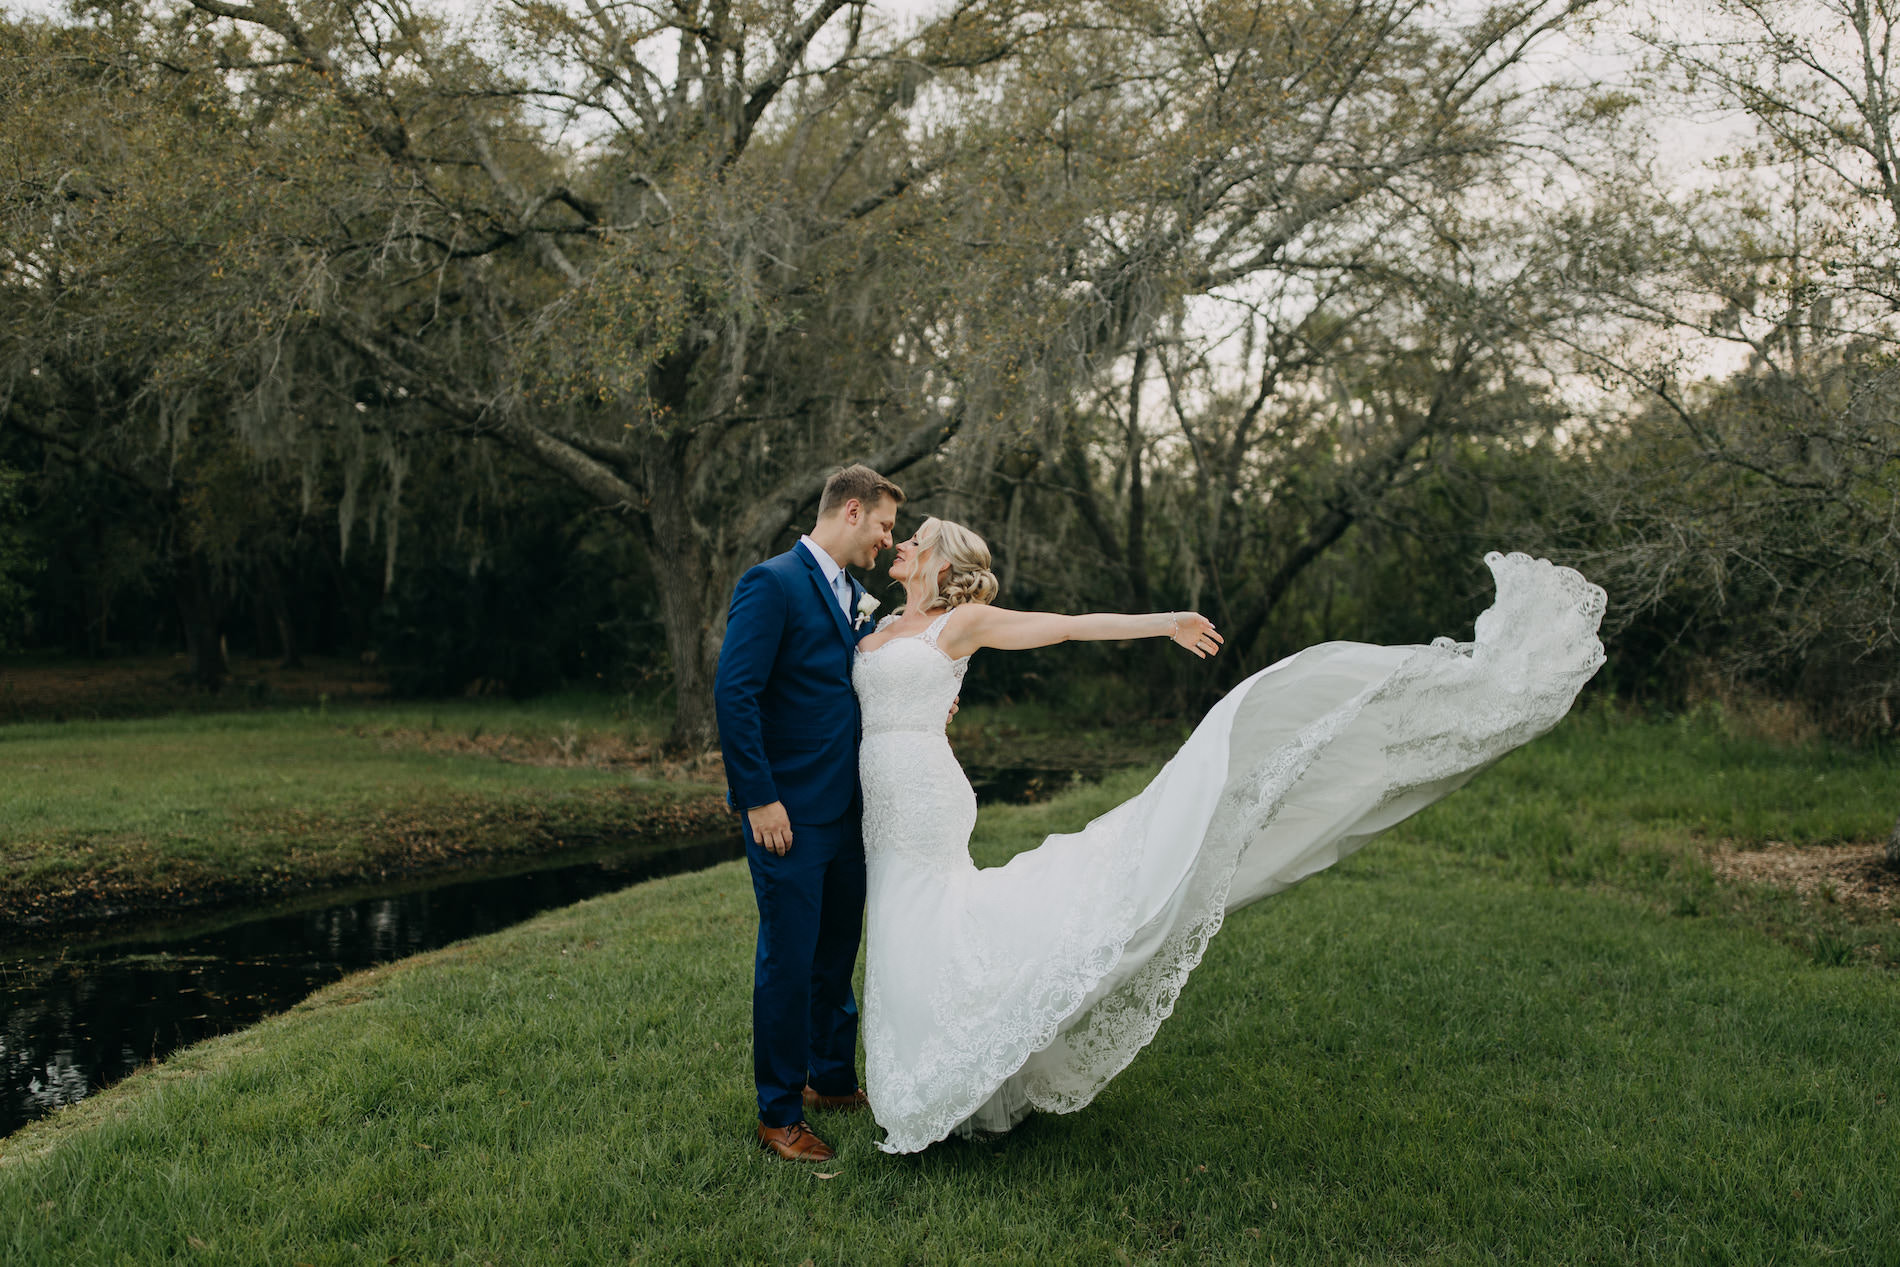 Fun Classic Bride and Groom Outdoor Wedding Portrait with Bride's Wedding Dress Train Blowing in the Wind